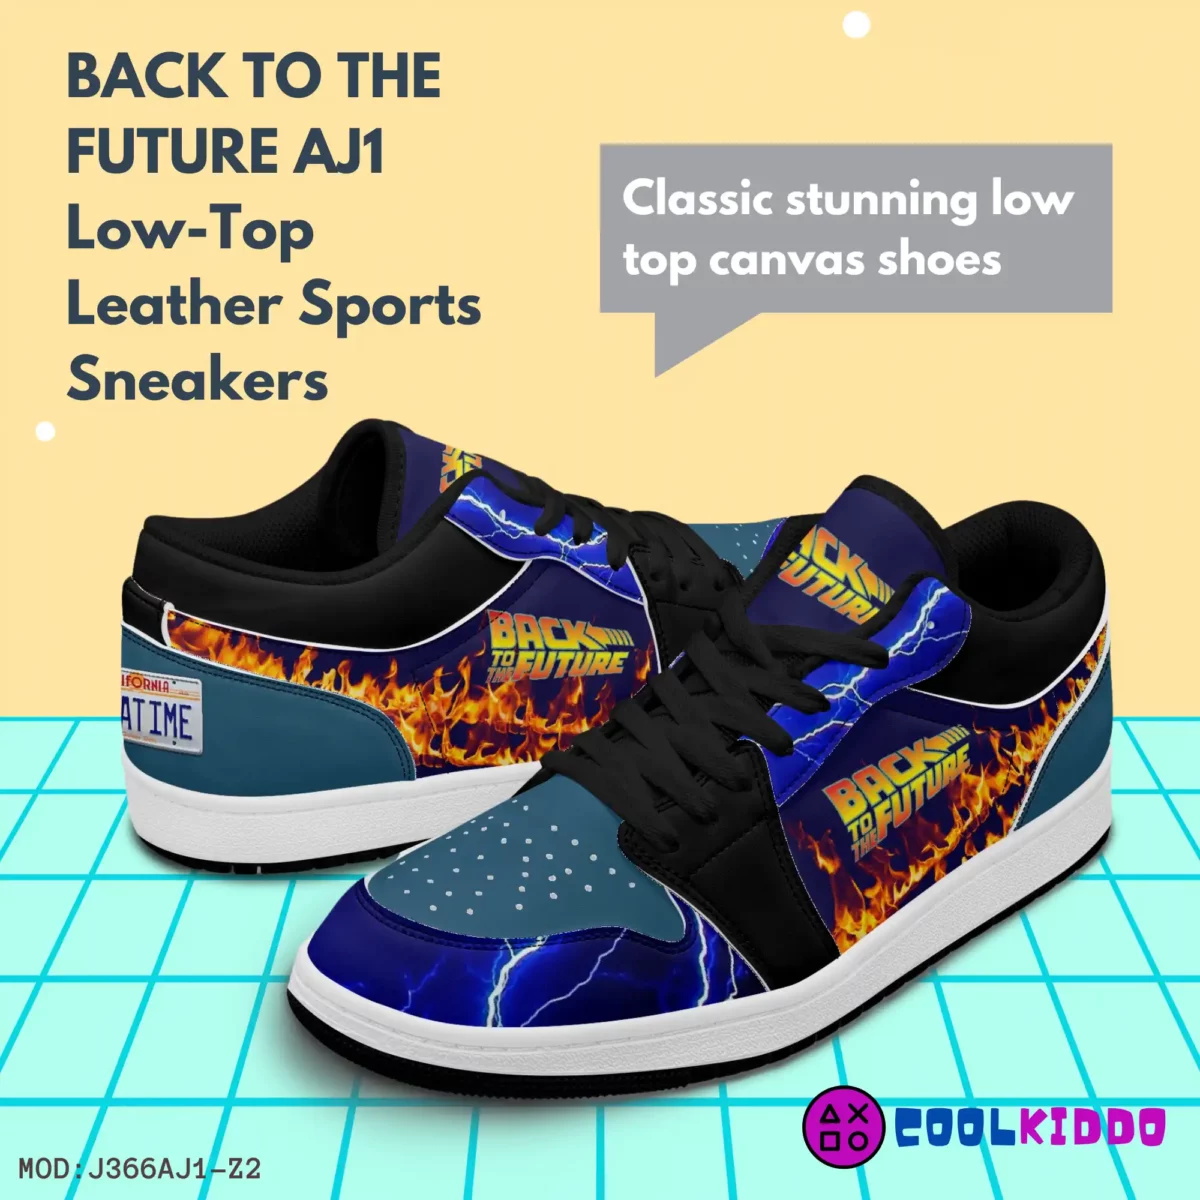 Back to the Future Movie Inspired Low-Top Leather Sneakers – Vintage Print Shoes for Youth/Adults Cool Kiddo 10